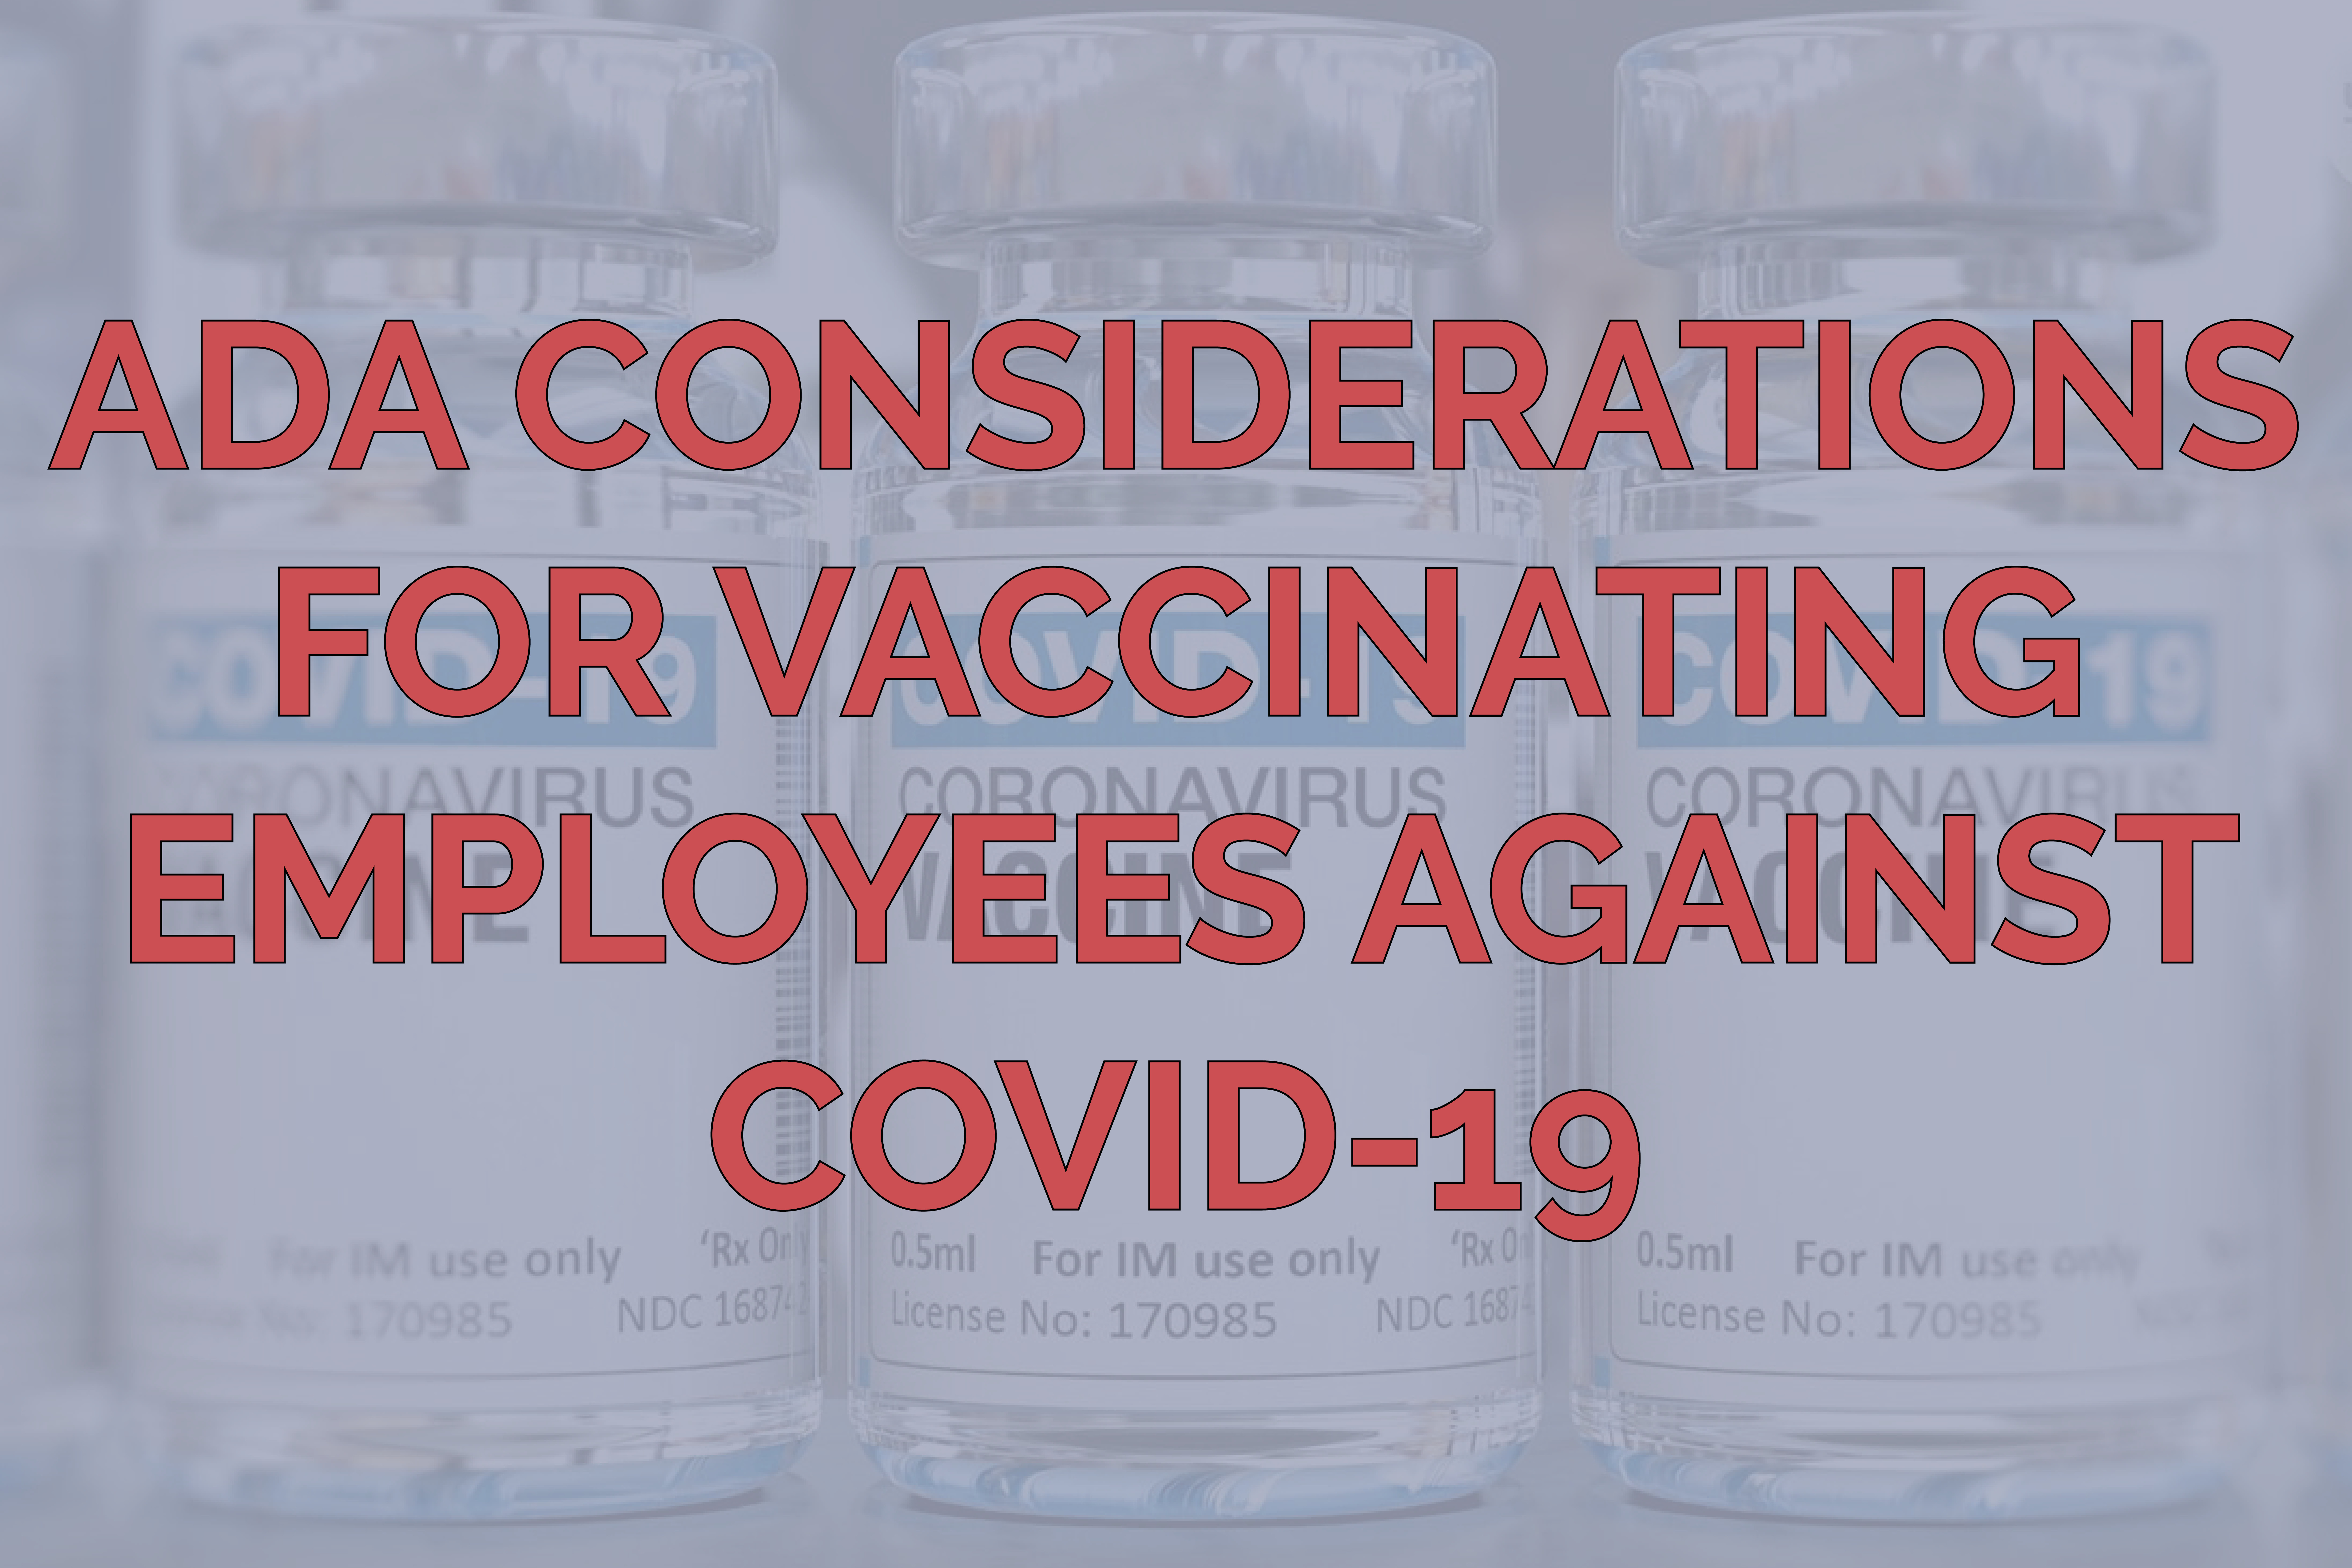 ADA Consideration for Vaccinating Employees Against COVID-19